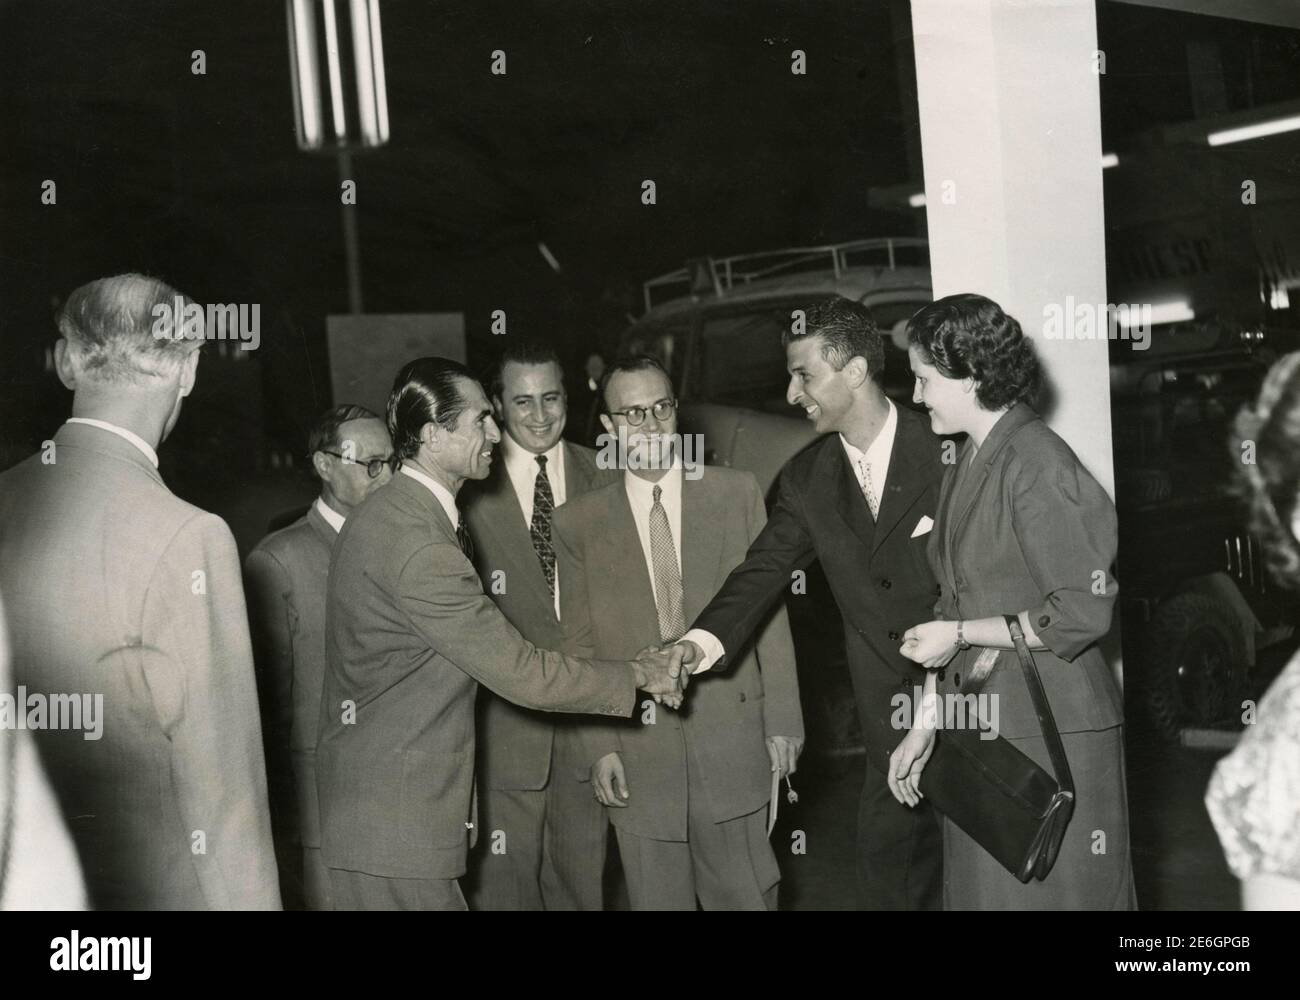 Syrian diplomats exchanging greetings, Czech Republic 1960s Stock Photo